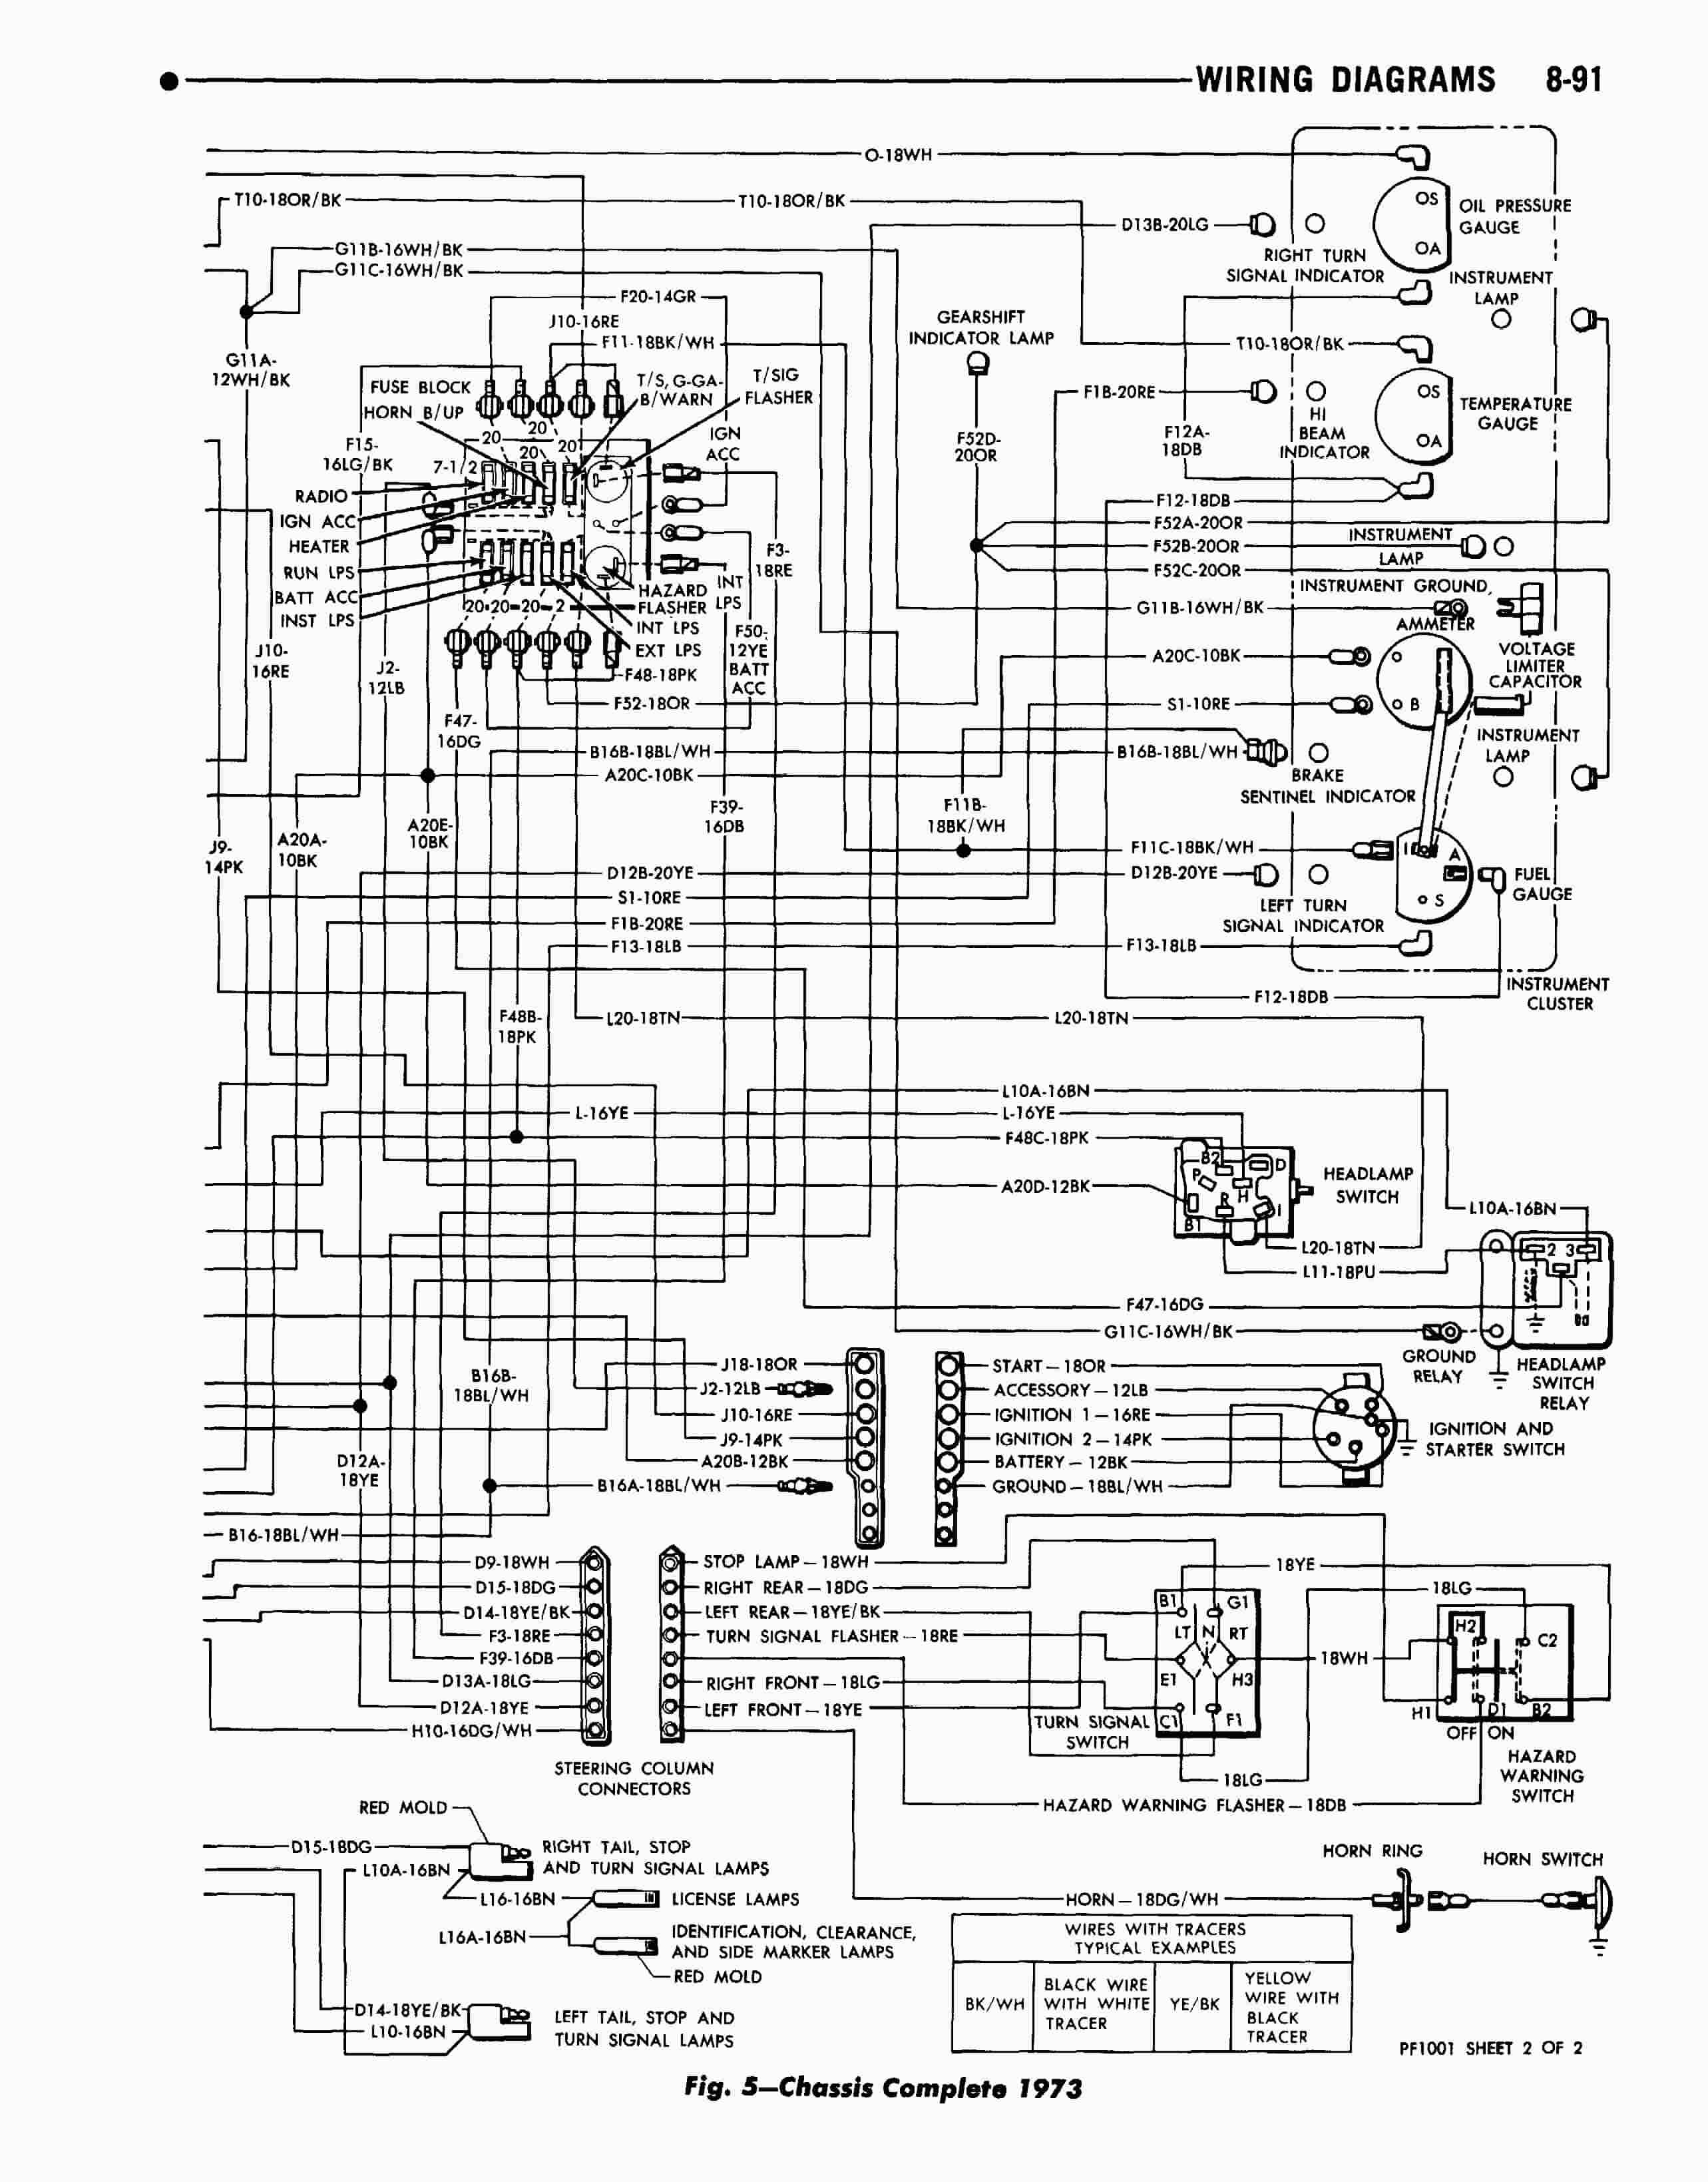 Dave's Place - 73 Dodge Class A Chassis Wiring Diagram Dodge 318 Engine Wiring Diagram Daves Place